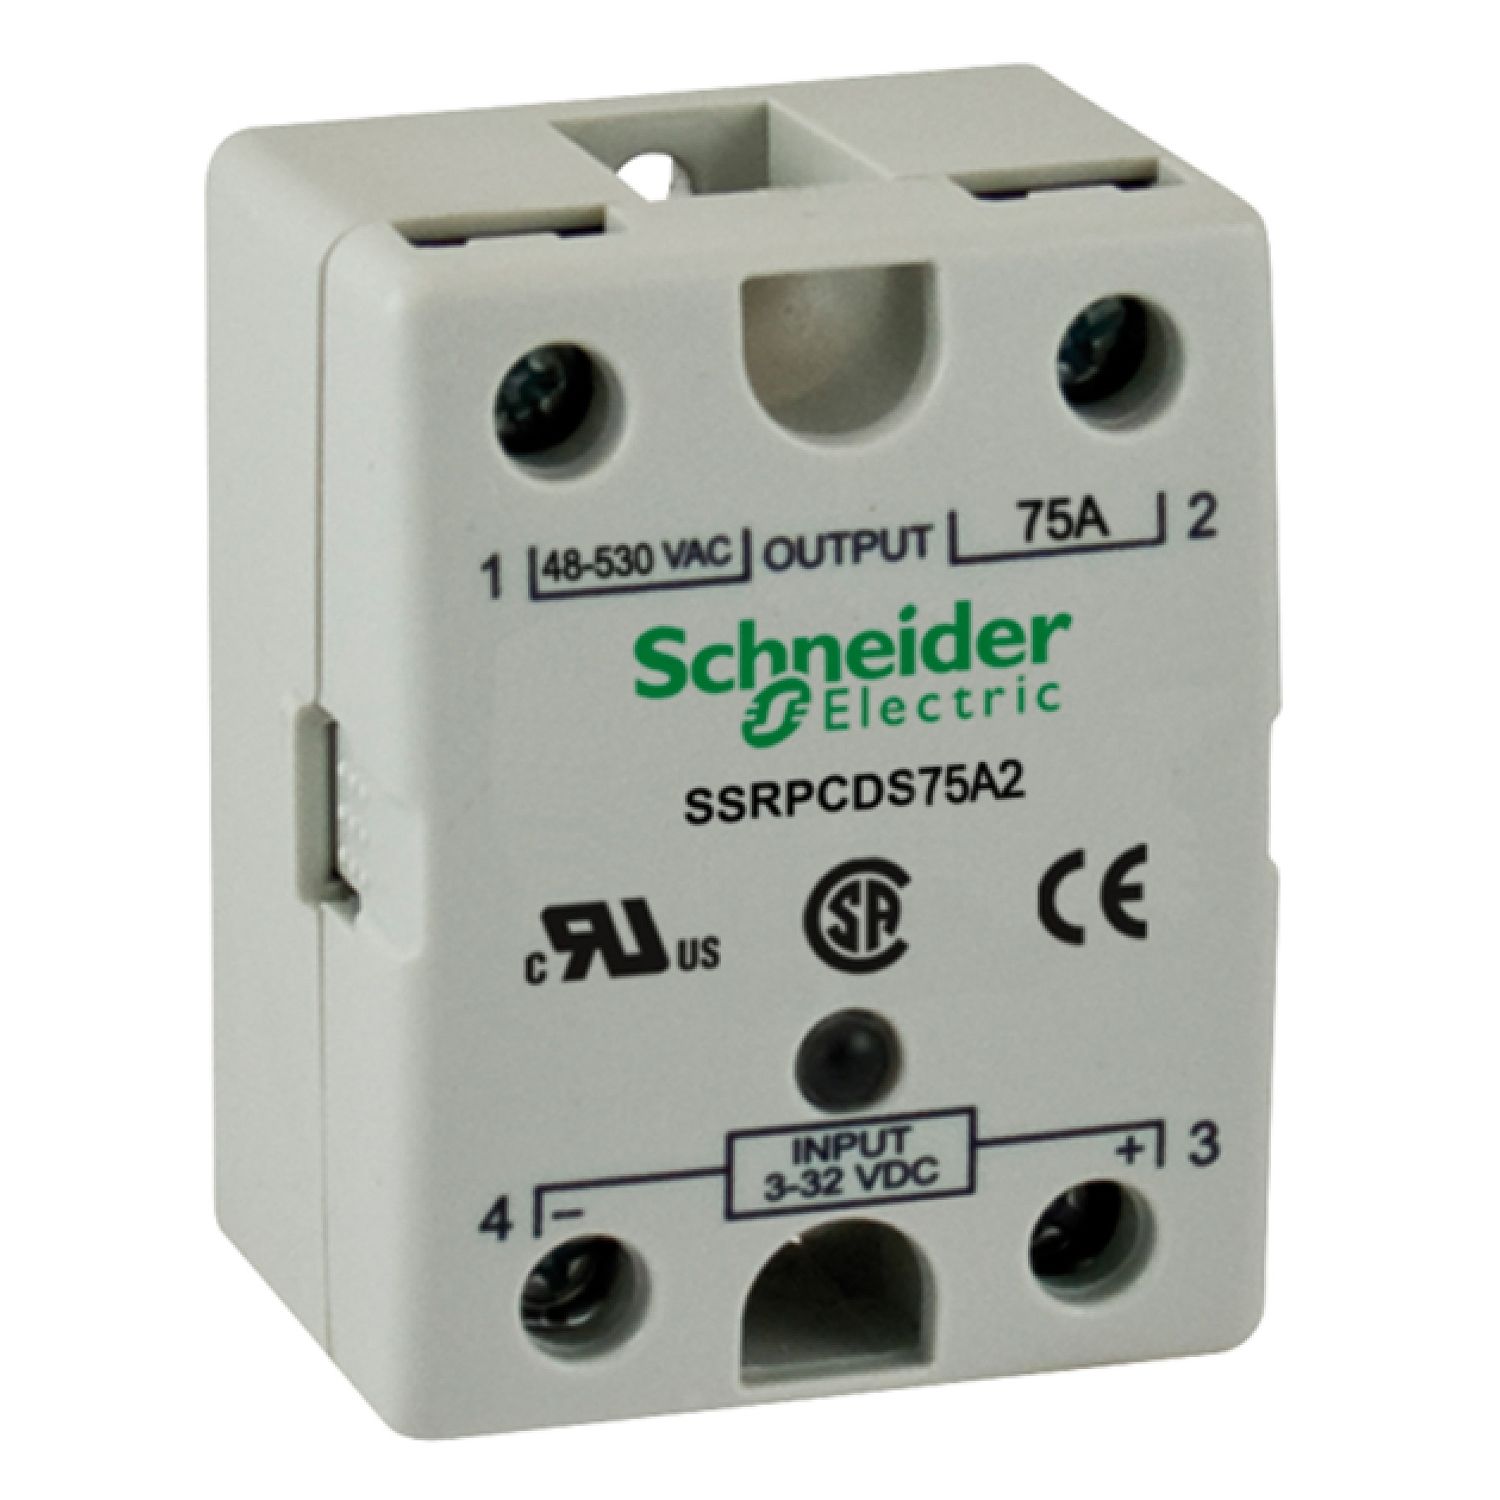 SSRPCDS75A2 solid state relay - panel mounting - input 3-32 V DC, output 48-530 V AC, 75A